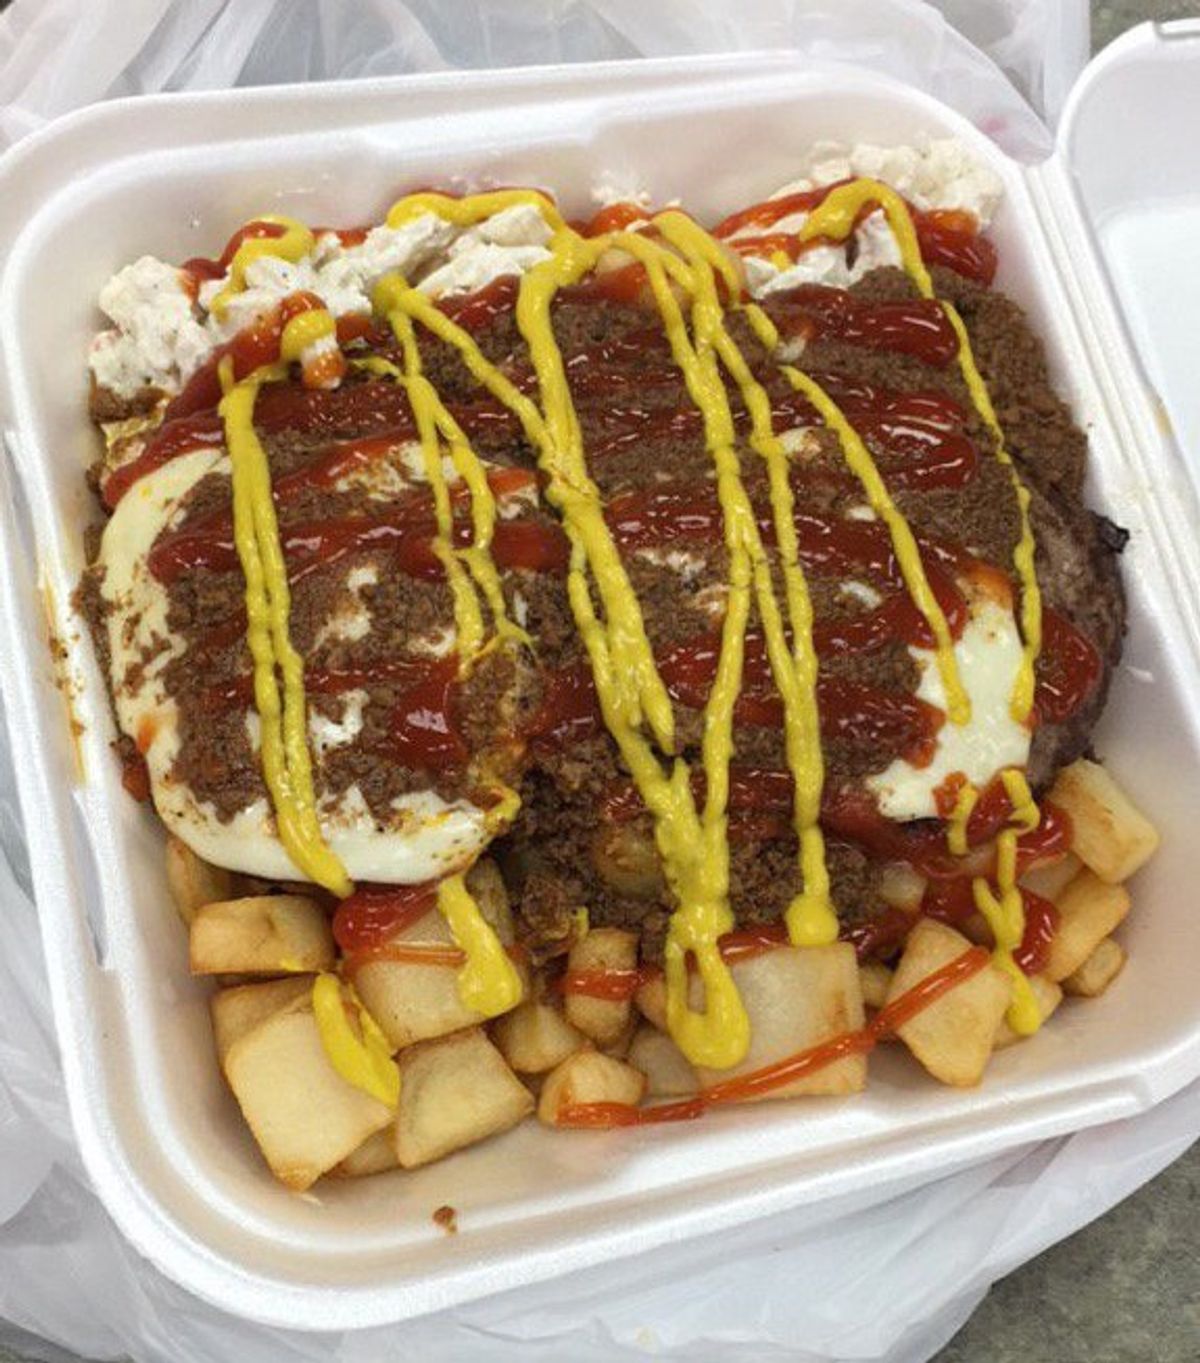 The Garbage Plate: Trash Never Tasted So Good